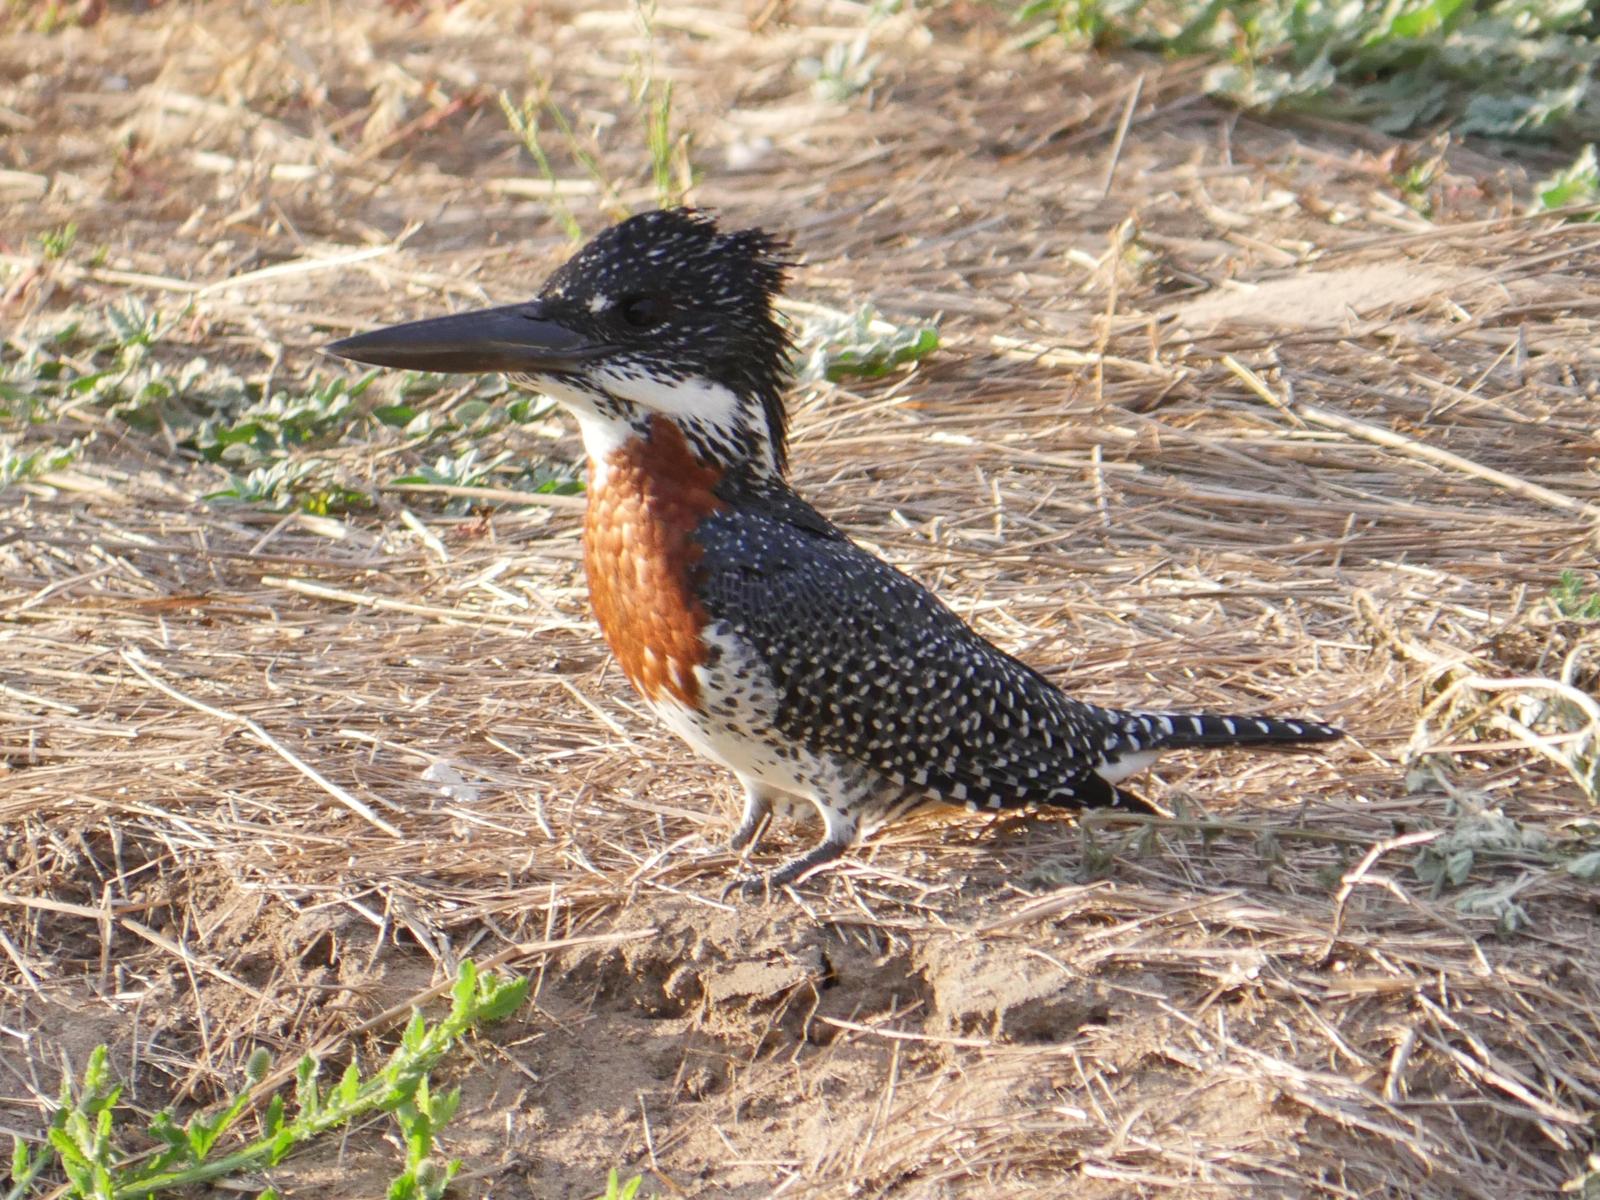 Giant Kingfisher Photo by Peter Lowe